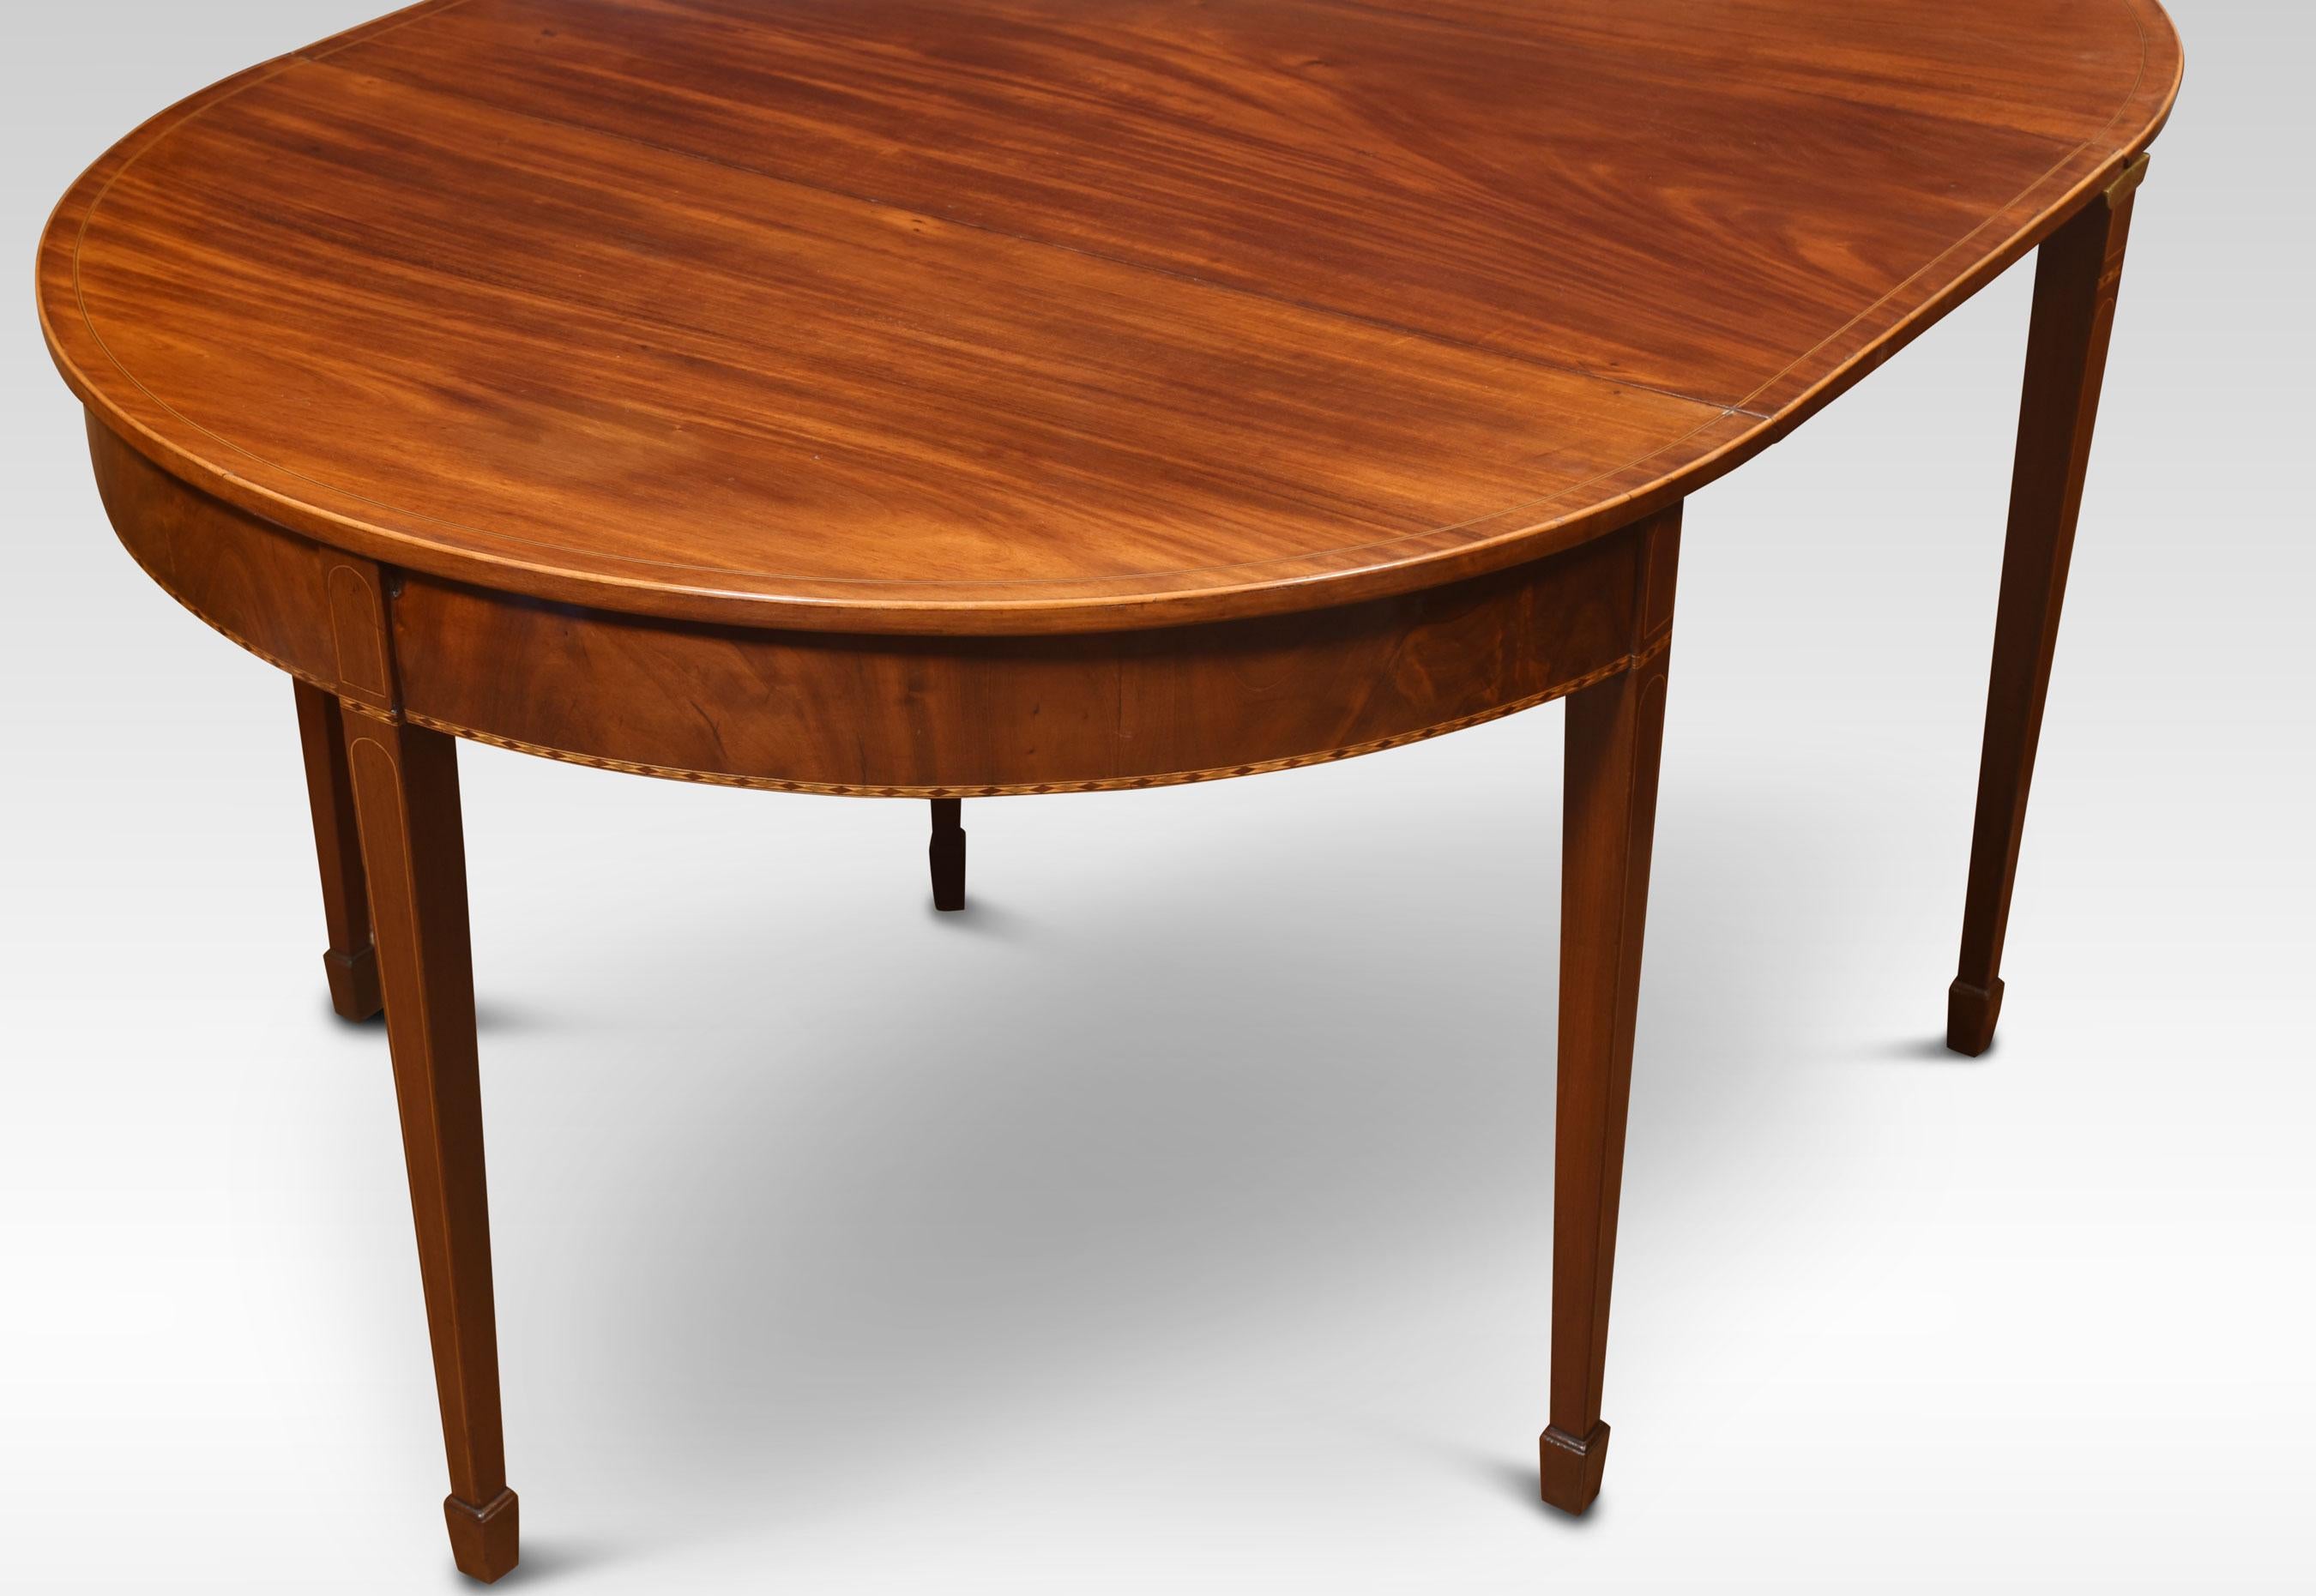 Mahogany inlaid demi-lune dining table or side tables, each with ebony and satinwood stringing, chequered frieze and raised on squared tapered supports and spade feet. One table with rectangular fall flap joining the two.
Dimensions
Height 28.5